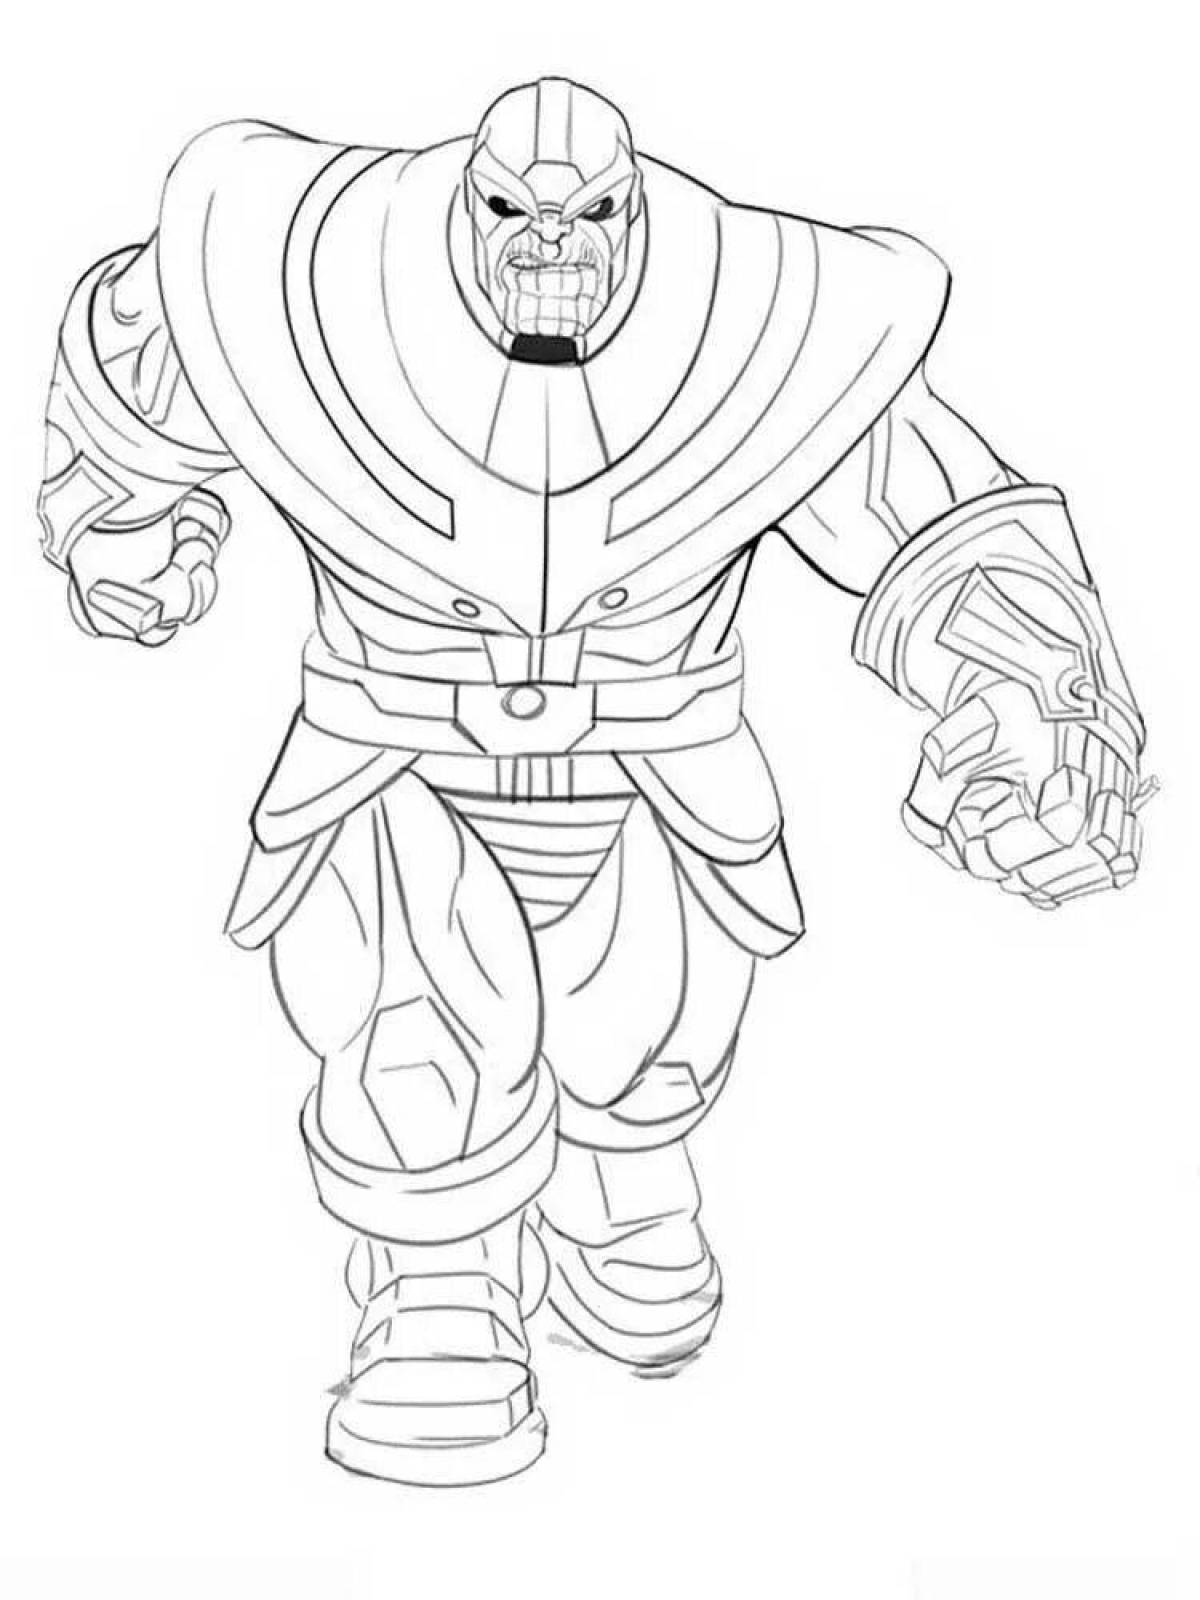 Coloring page dazzling thanas